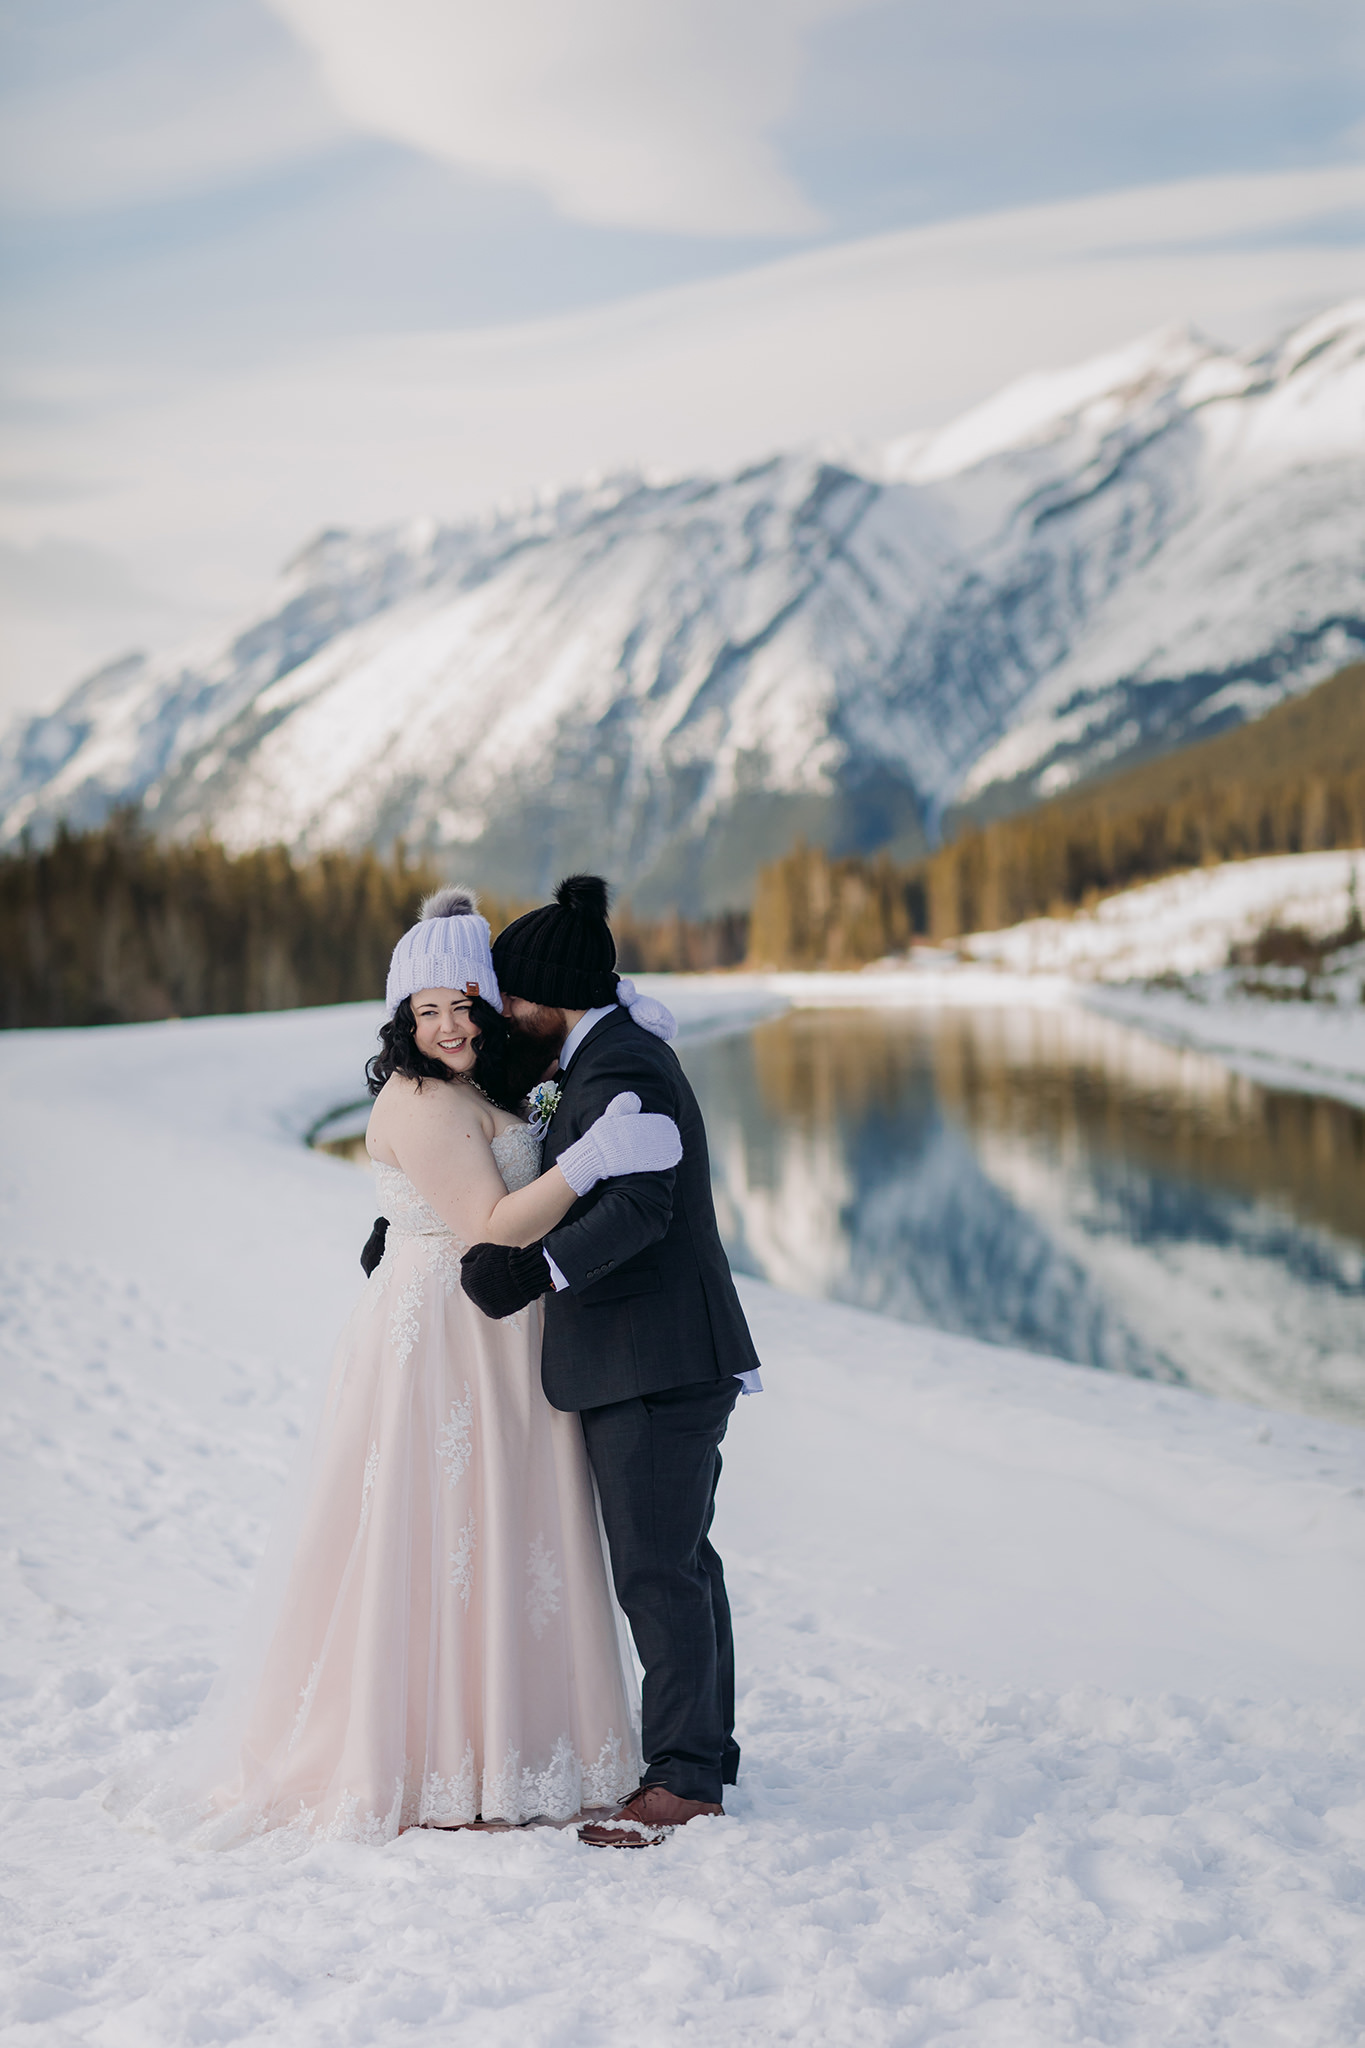 Falcon Crest Lodge wedding Canmore winter wedding photos bride & groom at Goat Pond in Kananaskis photographed by ENV Photography wool hats mittens